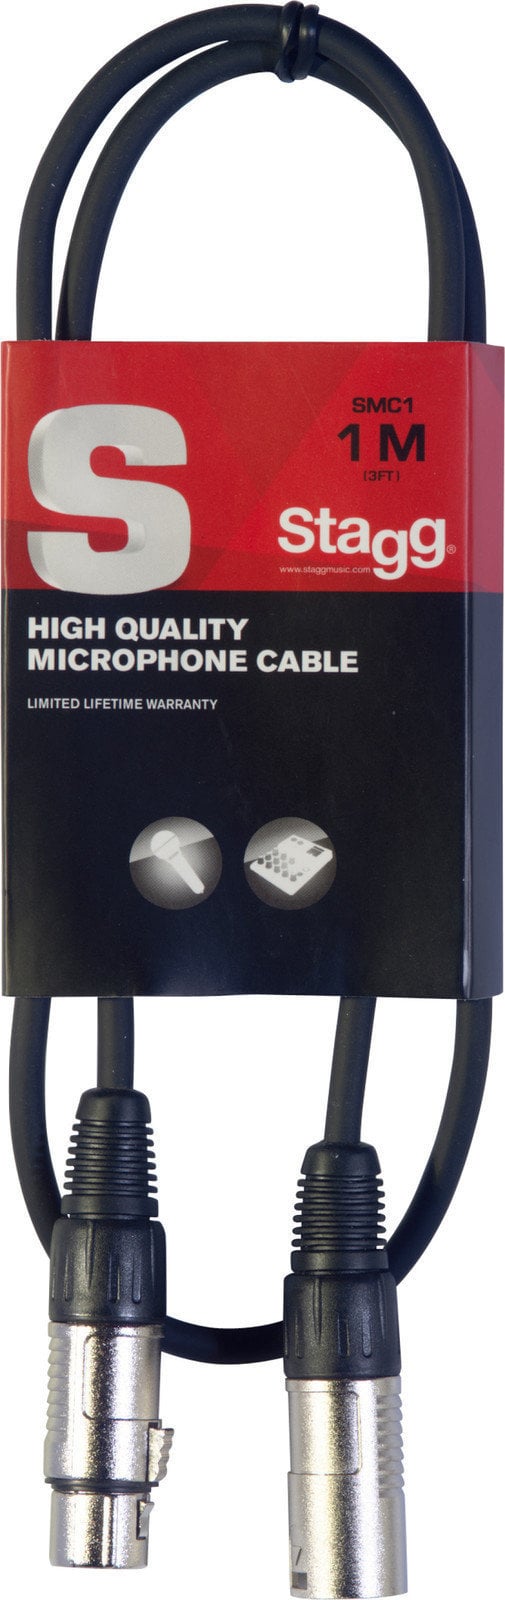 Microphone Cable Stagg SMC1 Black 100 cm